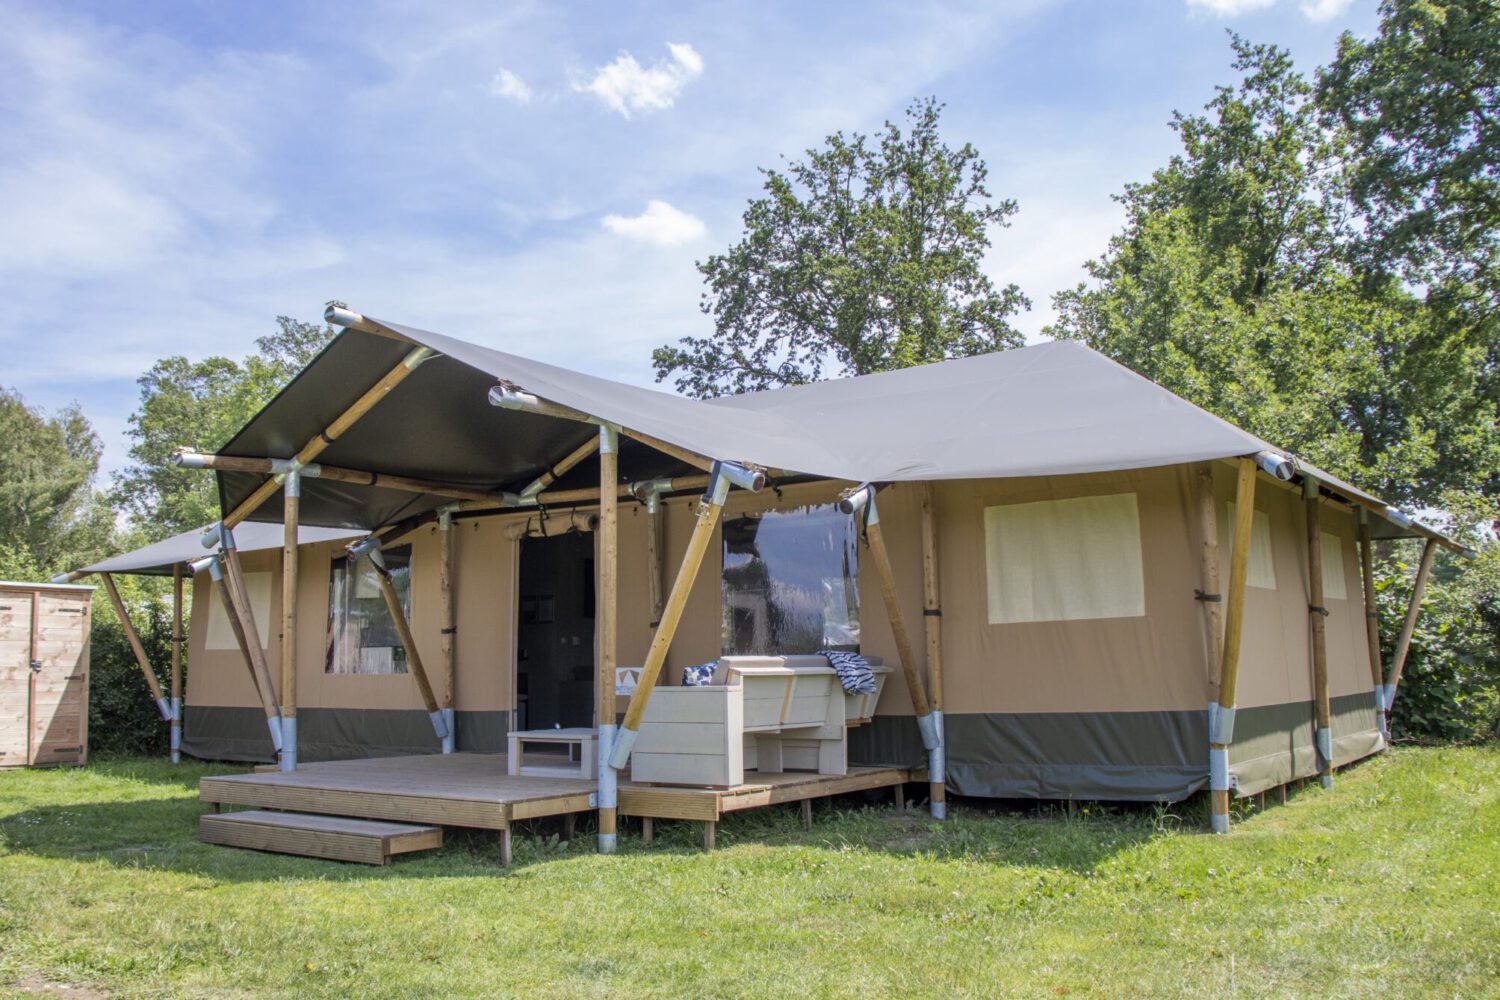 Luxury Glamping Safari Tents Of The Best Quality Outstanding Tent